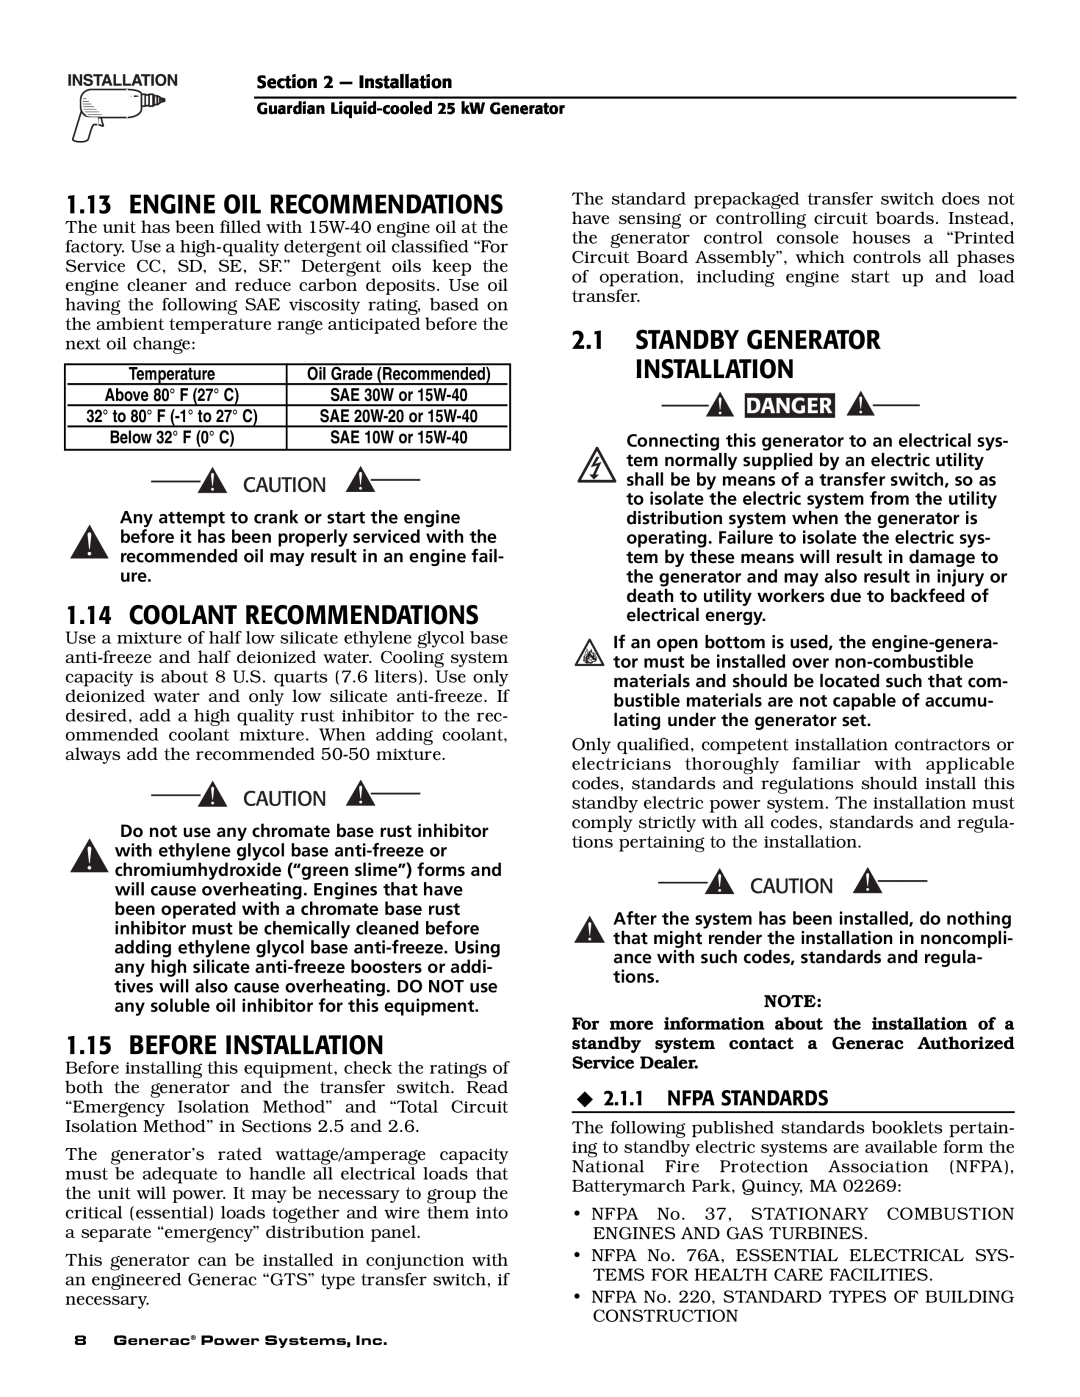 Generac Power Systems 005040-0, 005040-1, 005053-0, 005053-1, 005054-0, 005054-1 Engine Oil Recommendations, Danger 